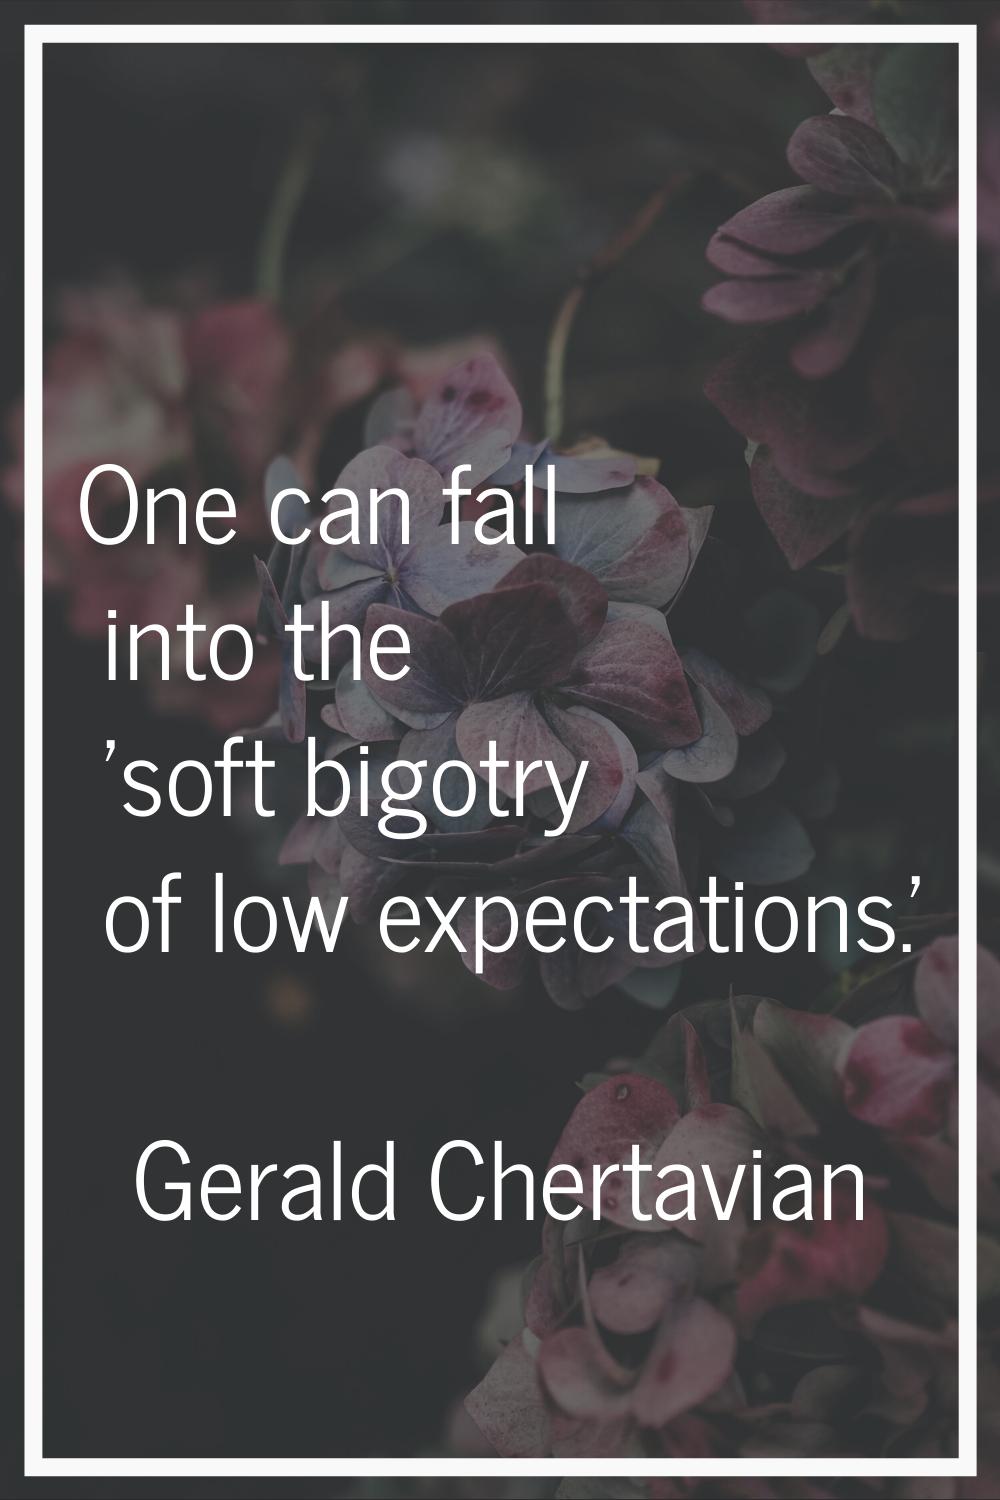 One can fall into the 'soft bigotry of low expectations.'